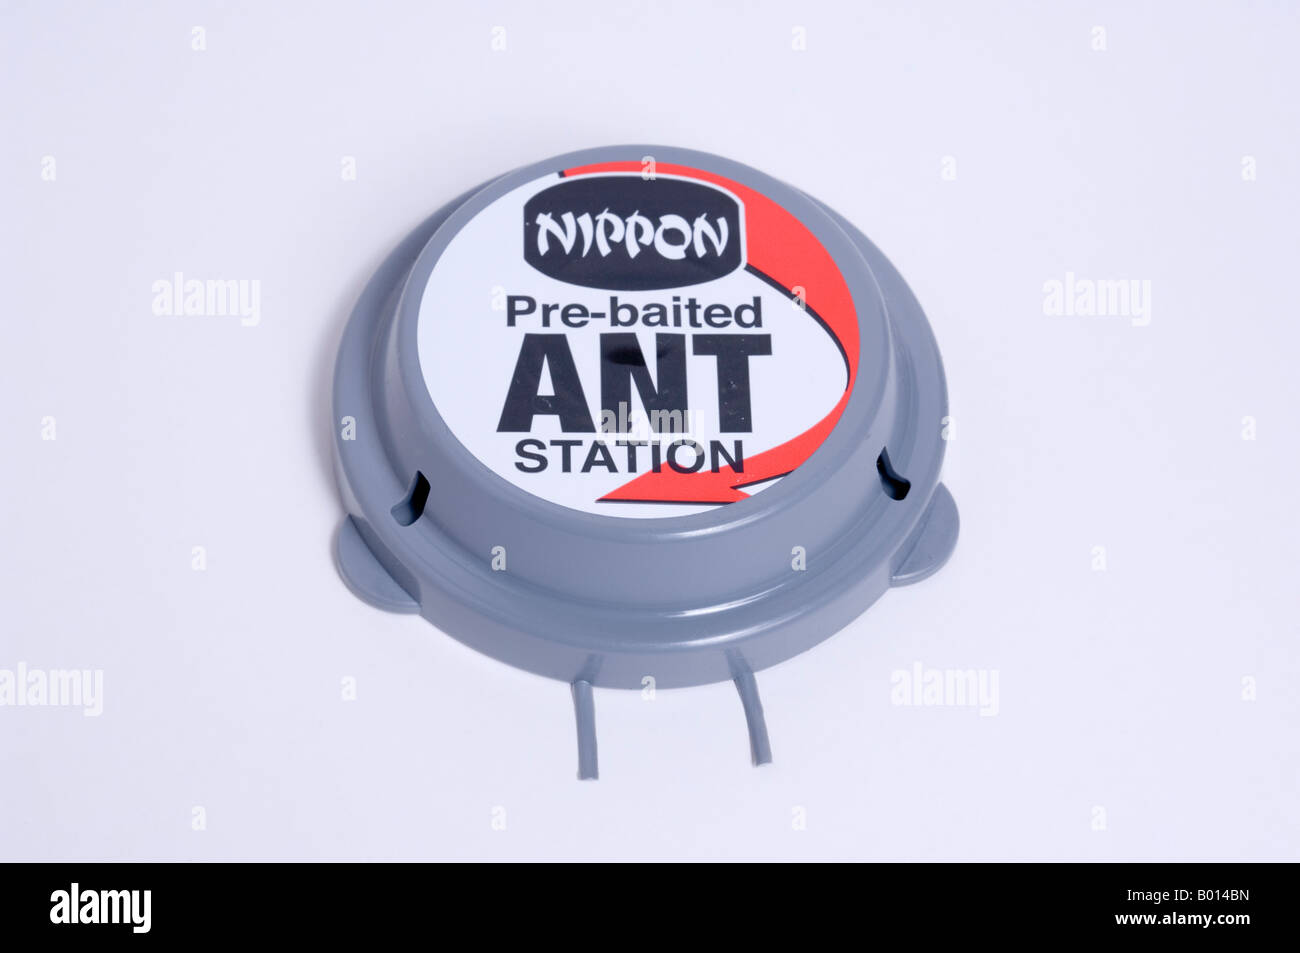 Nippon Pre-baited Ant Station used for killing ants Stock Photo